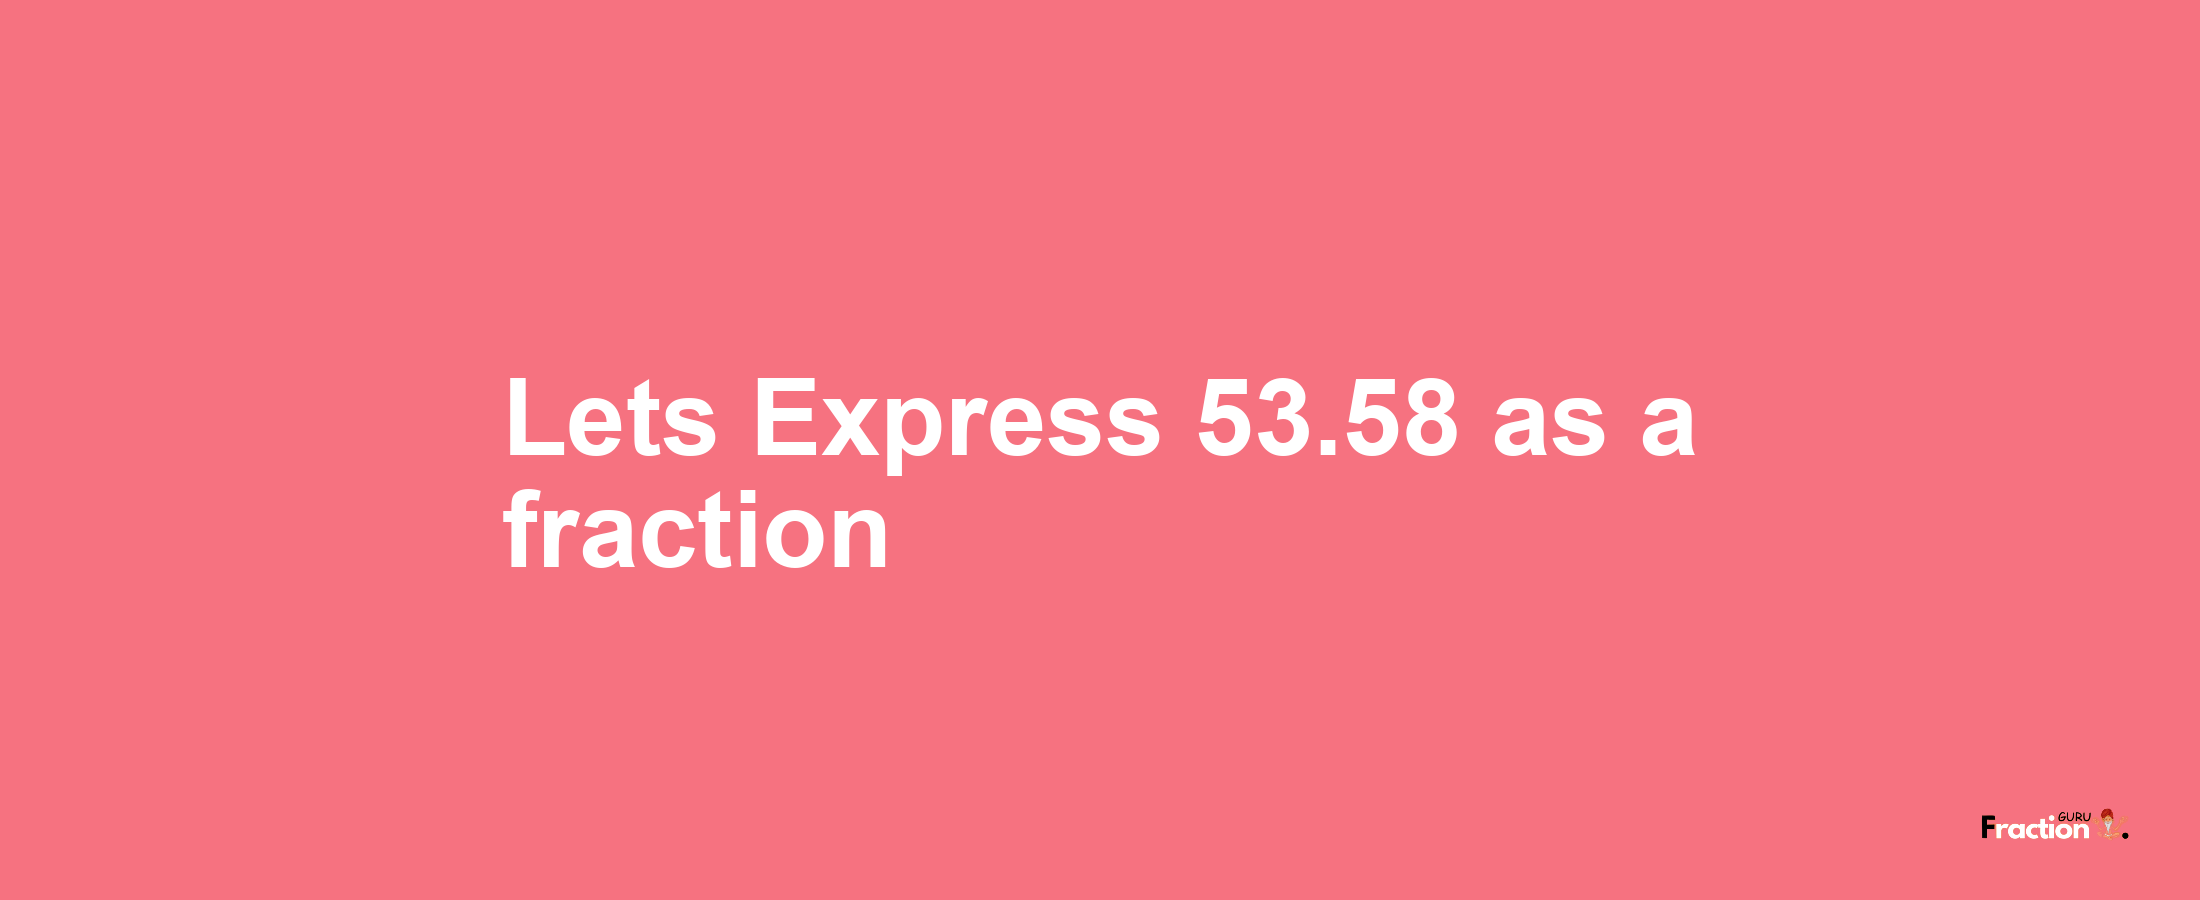 Lets Express 53.58 as afraction